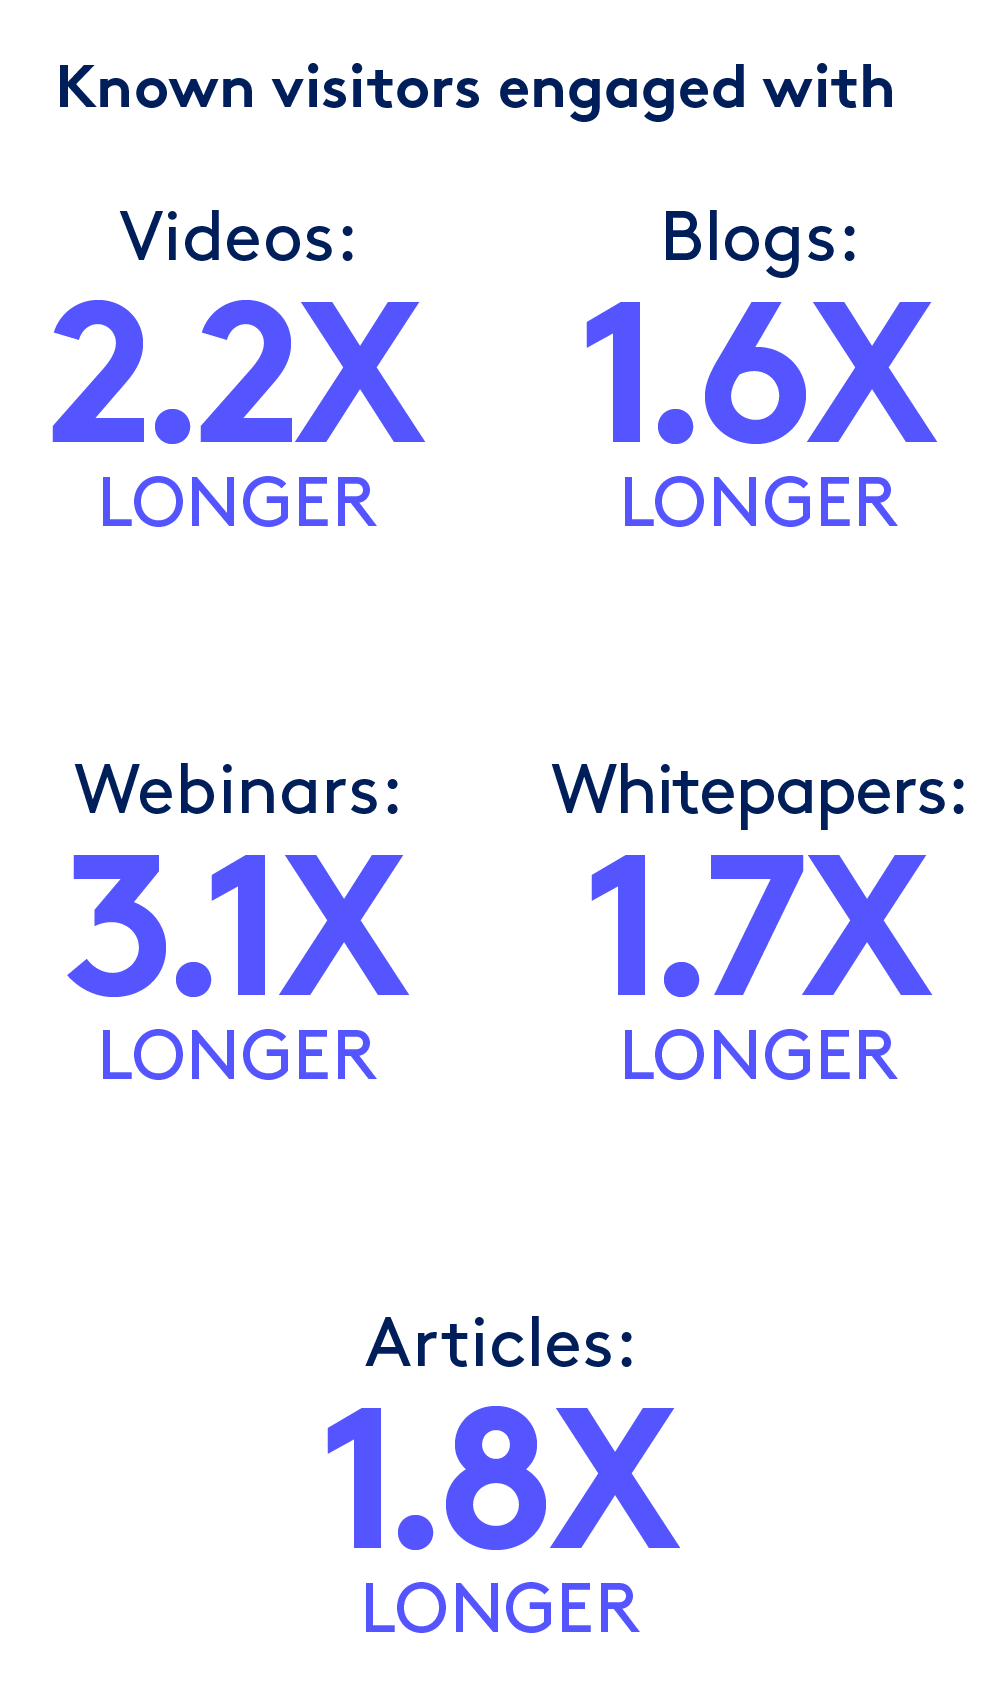 Text: Known visitors engaged with videos 2.2X longer, blogs 1.6X longer, webinars 3.1X longer, whitepapers 1.7X longer and articles 1.8X longer than unknown visitors